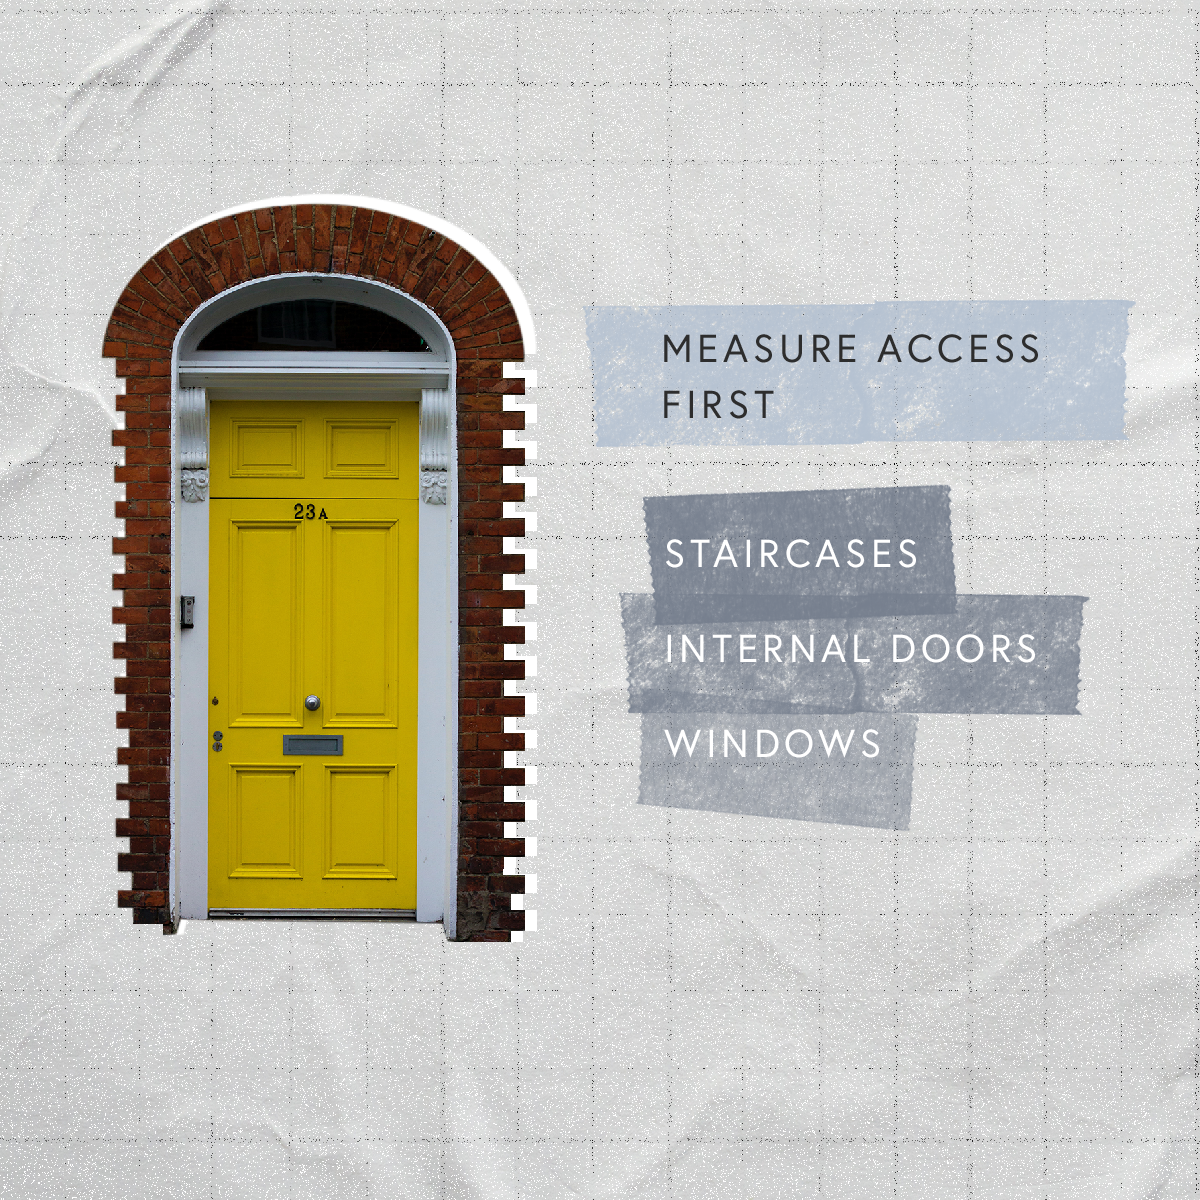 Measure access first including staircases, internal doors, windows text illustrated with a yellow door next to it